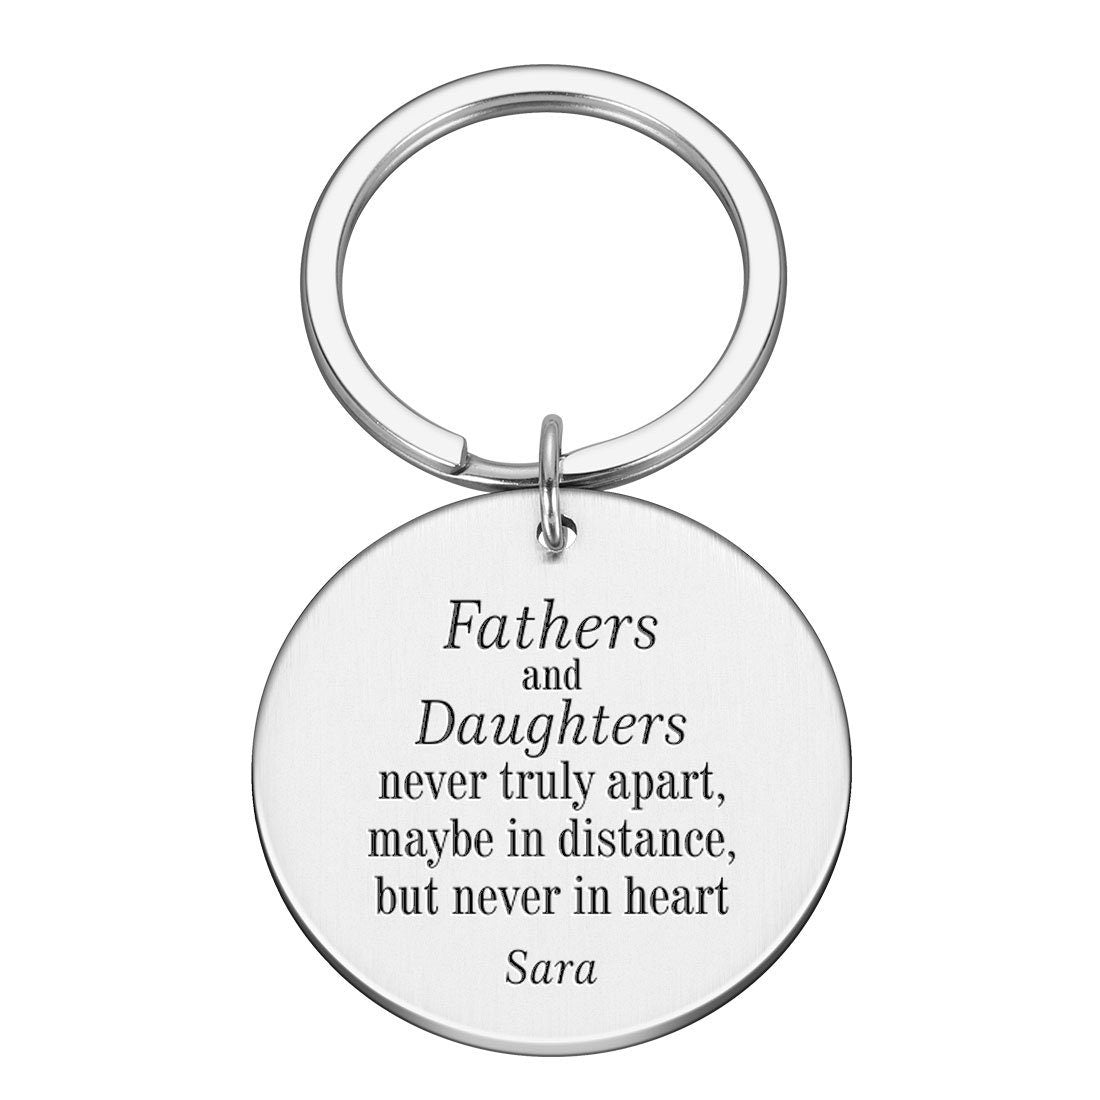 Personalised Enrgaved Metal Keyring Gift Dad | Fathers & Daughters never apart | Custom Names Text | Silver Black Gold Fathers day Keychain